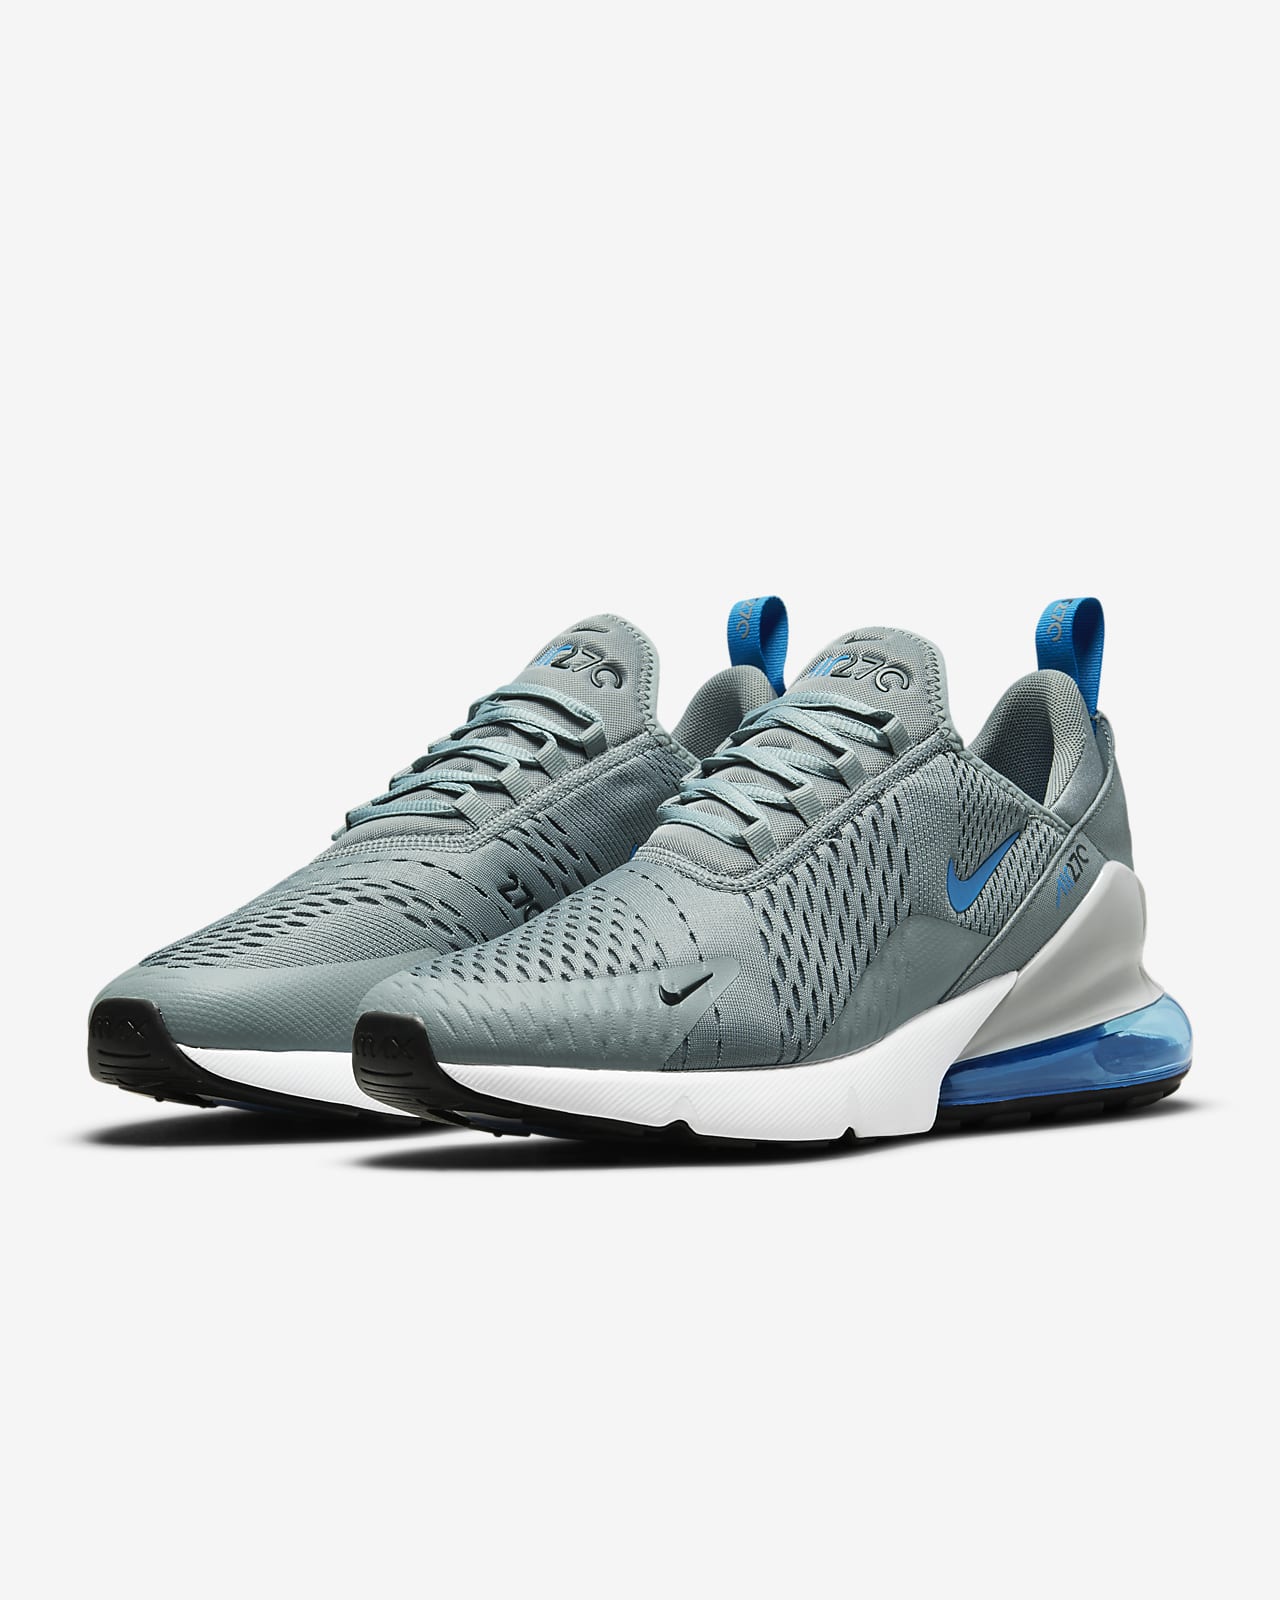 New Meaning Foreigner Humane Always Take Out Chilly Nike Air Max 270 White Grey Dark Blue Downtocomfort Com